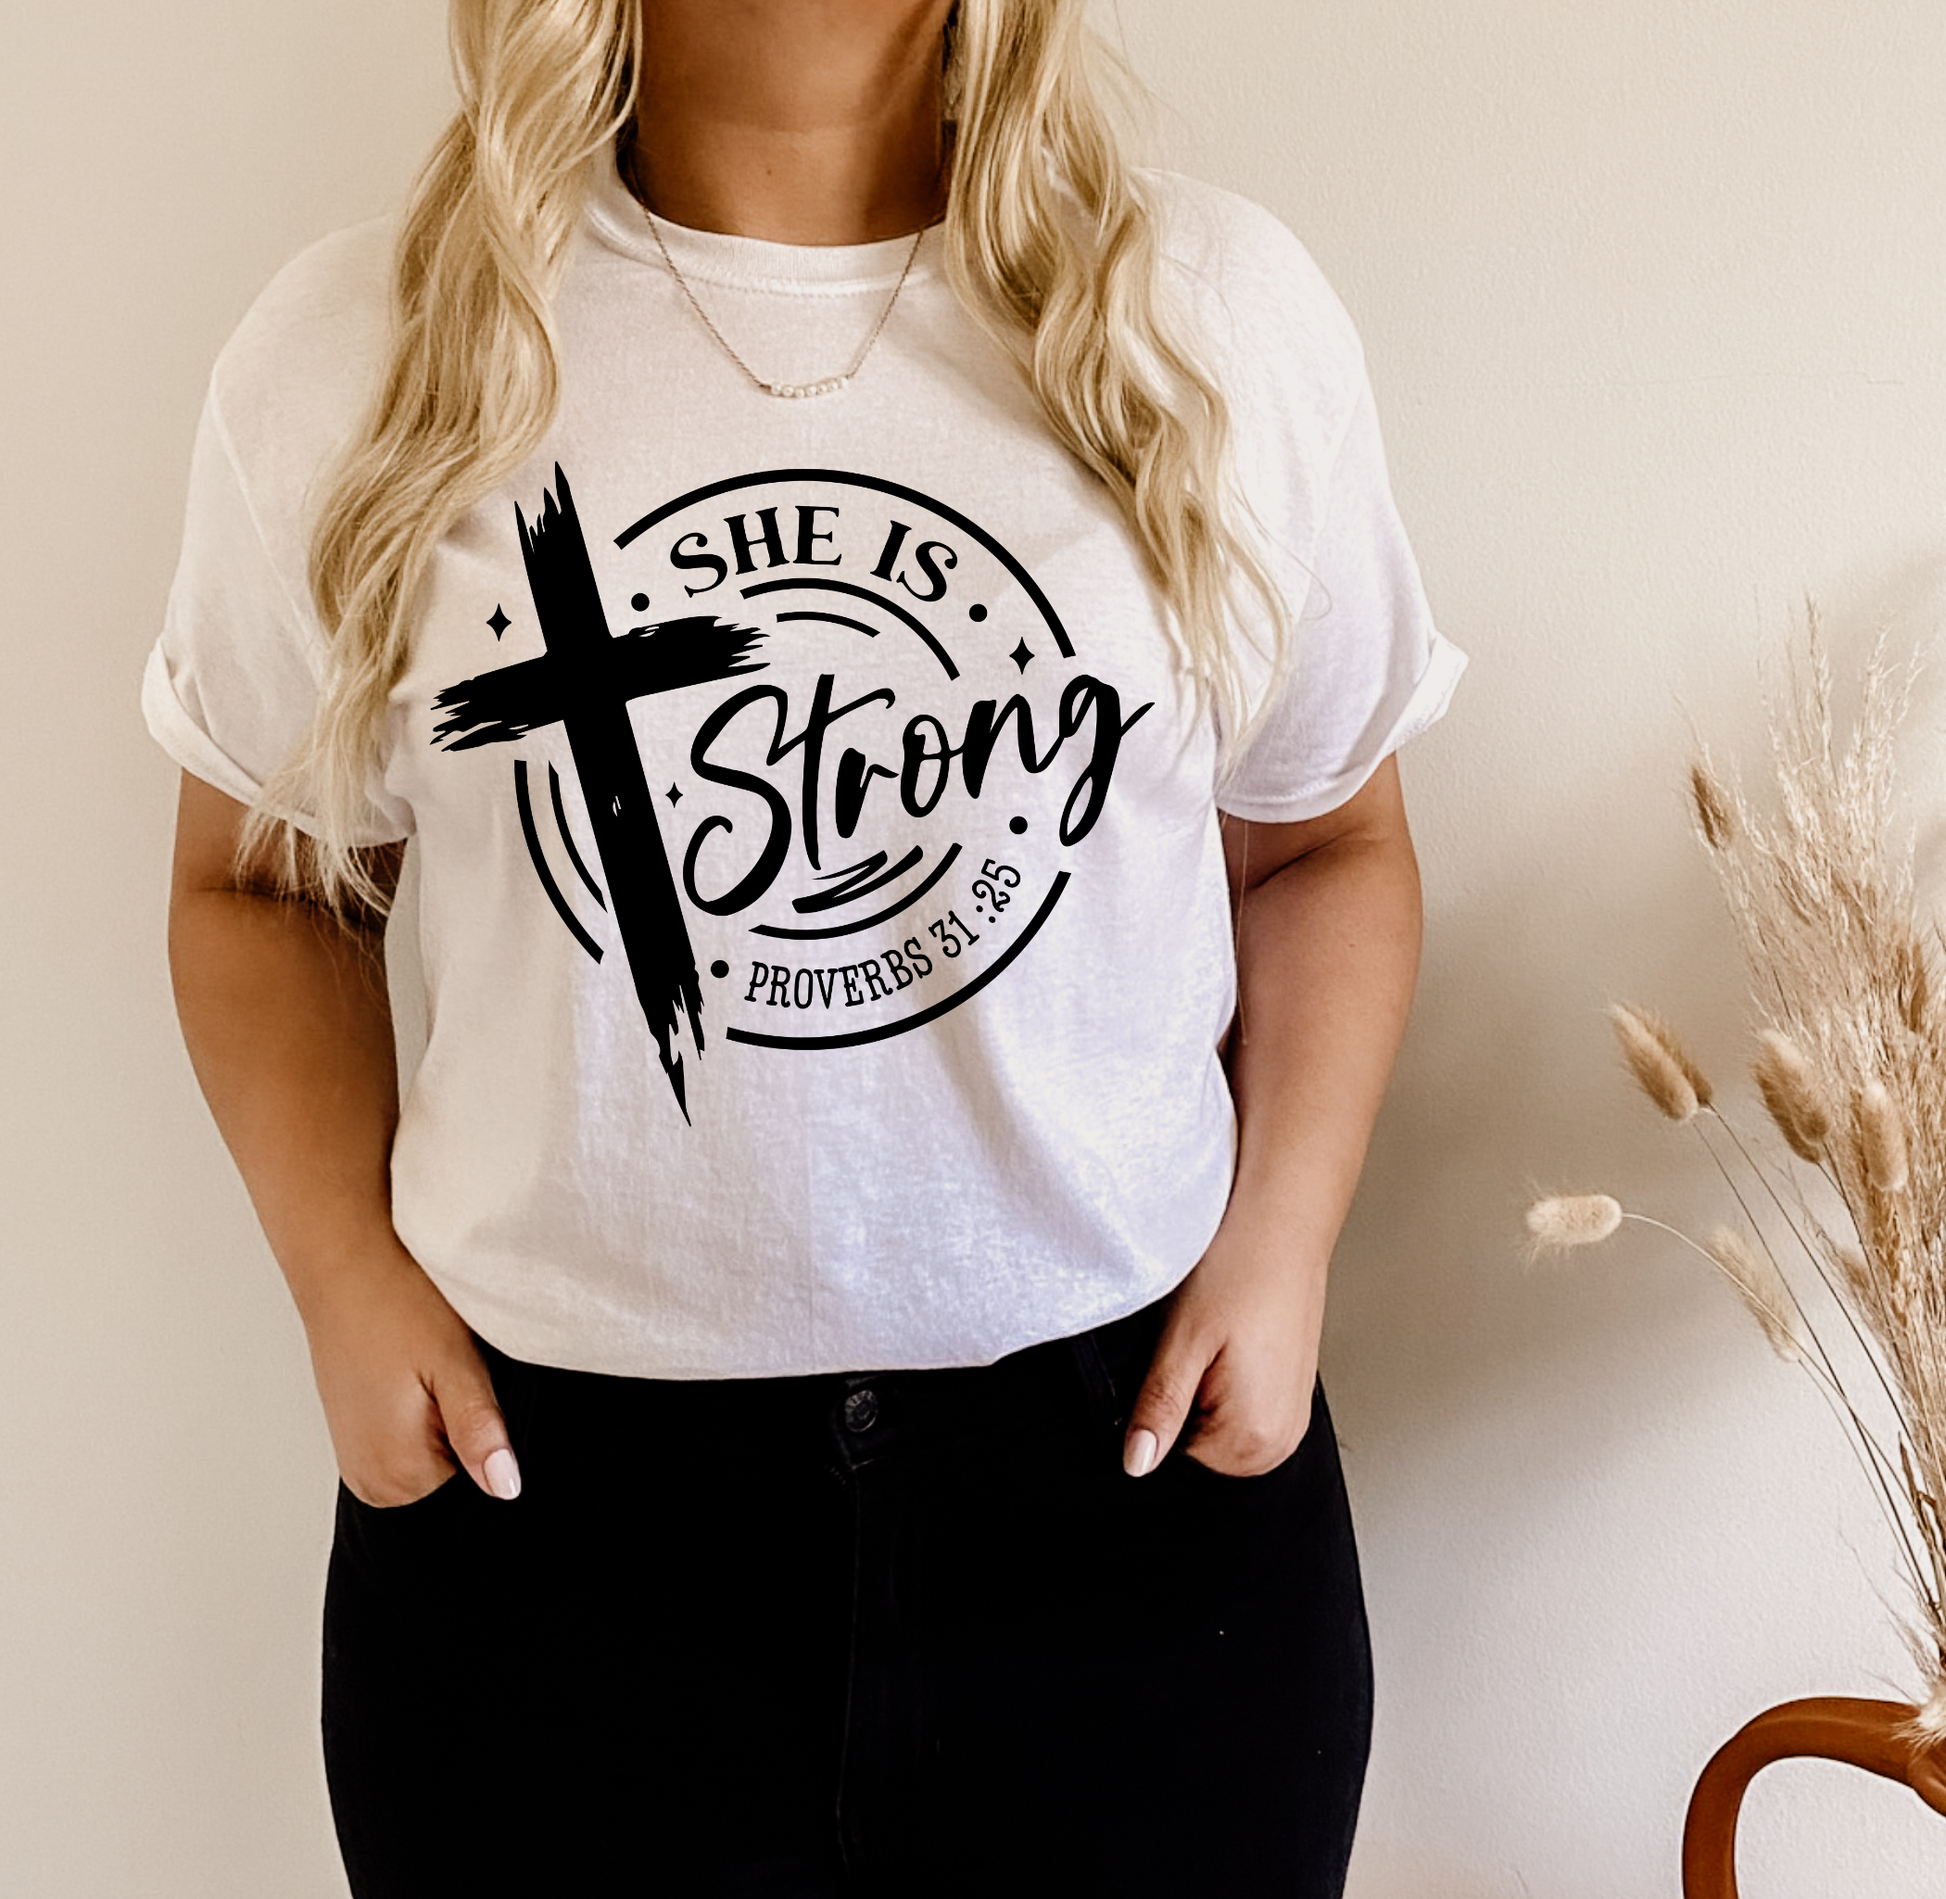 She is strong T-shirt Custom Tshirt Bambi Rae Collections   